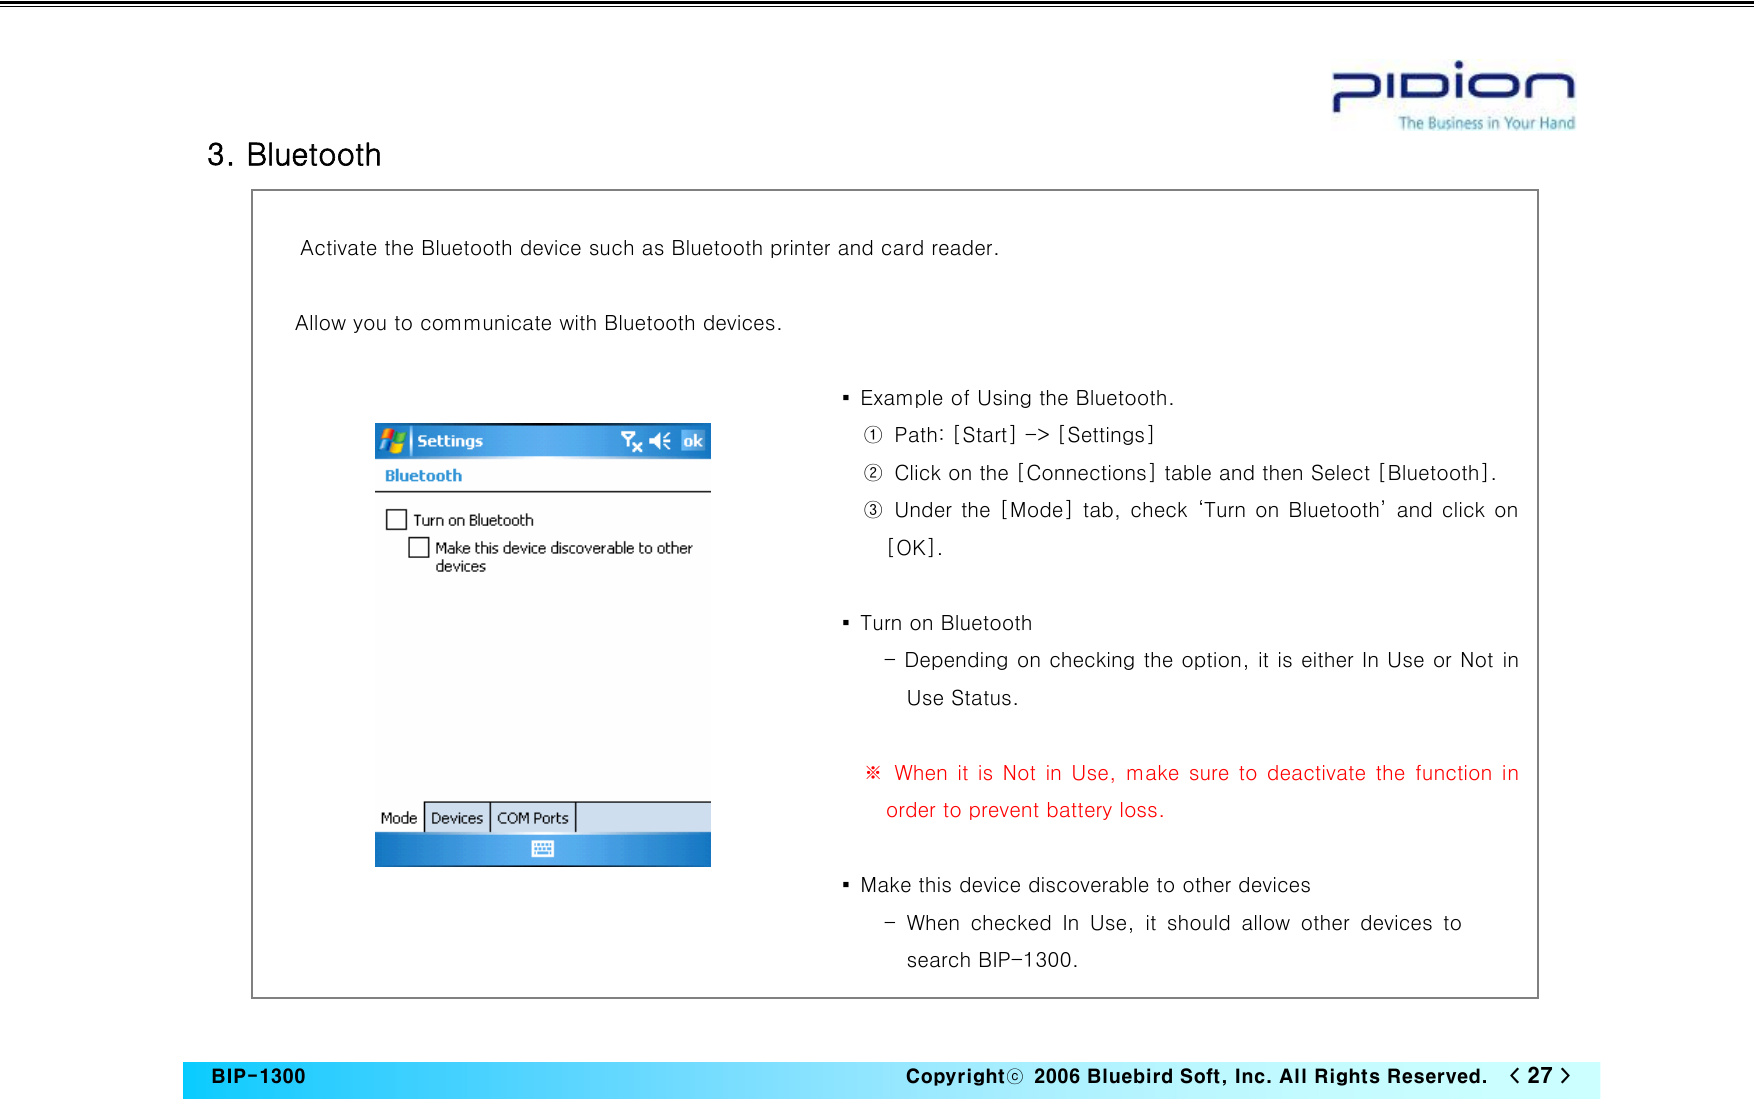   BIP-1300                                                                   Copyrightⓒ  2006 Bluebird Soft, Inc. All Rights Reserved.   &lt; 27 &gt;    3. Bluetooth  Activate the Bluetooth device such as Bluetooth printer and card reader.  Allow you to communicate with Bluetooth devices.  ▪  Example of Using the Bluetooth. ①  Path: [Start] -&gt; [Settings] ②  Click on the [Connections] table and then Select [Bluetooth]. ③ Under the [Mode] tab, check ‘Turn on Bluetooth’ and click on [OK].  ▪  Turn on Bluetooth - Depending on checking the option, it is either In Use or Not in Use Status.    ※ When it is Not in Use, make sure to deactivate the function in order to prevent battery loss.    ▪  Make this device discoverable to other devices - When checked In Use, it should allow other devices to search BIP-1300. 